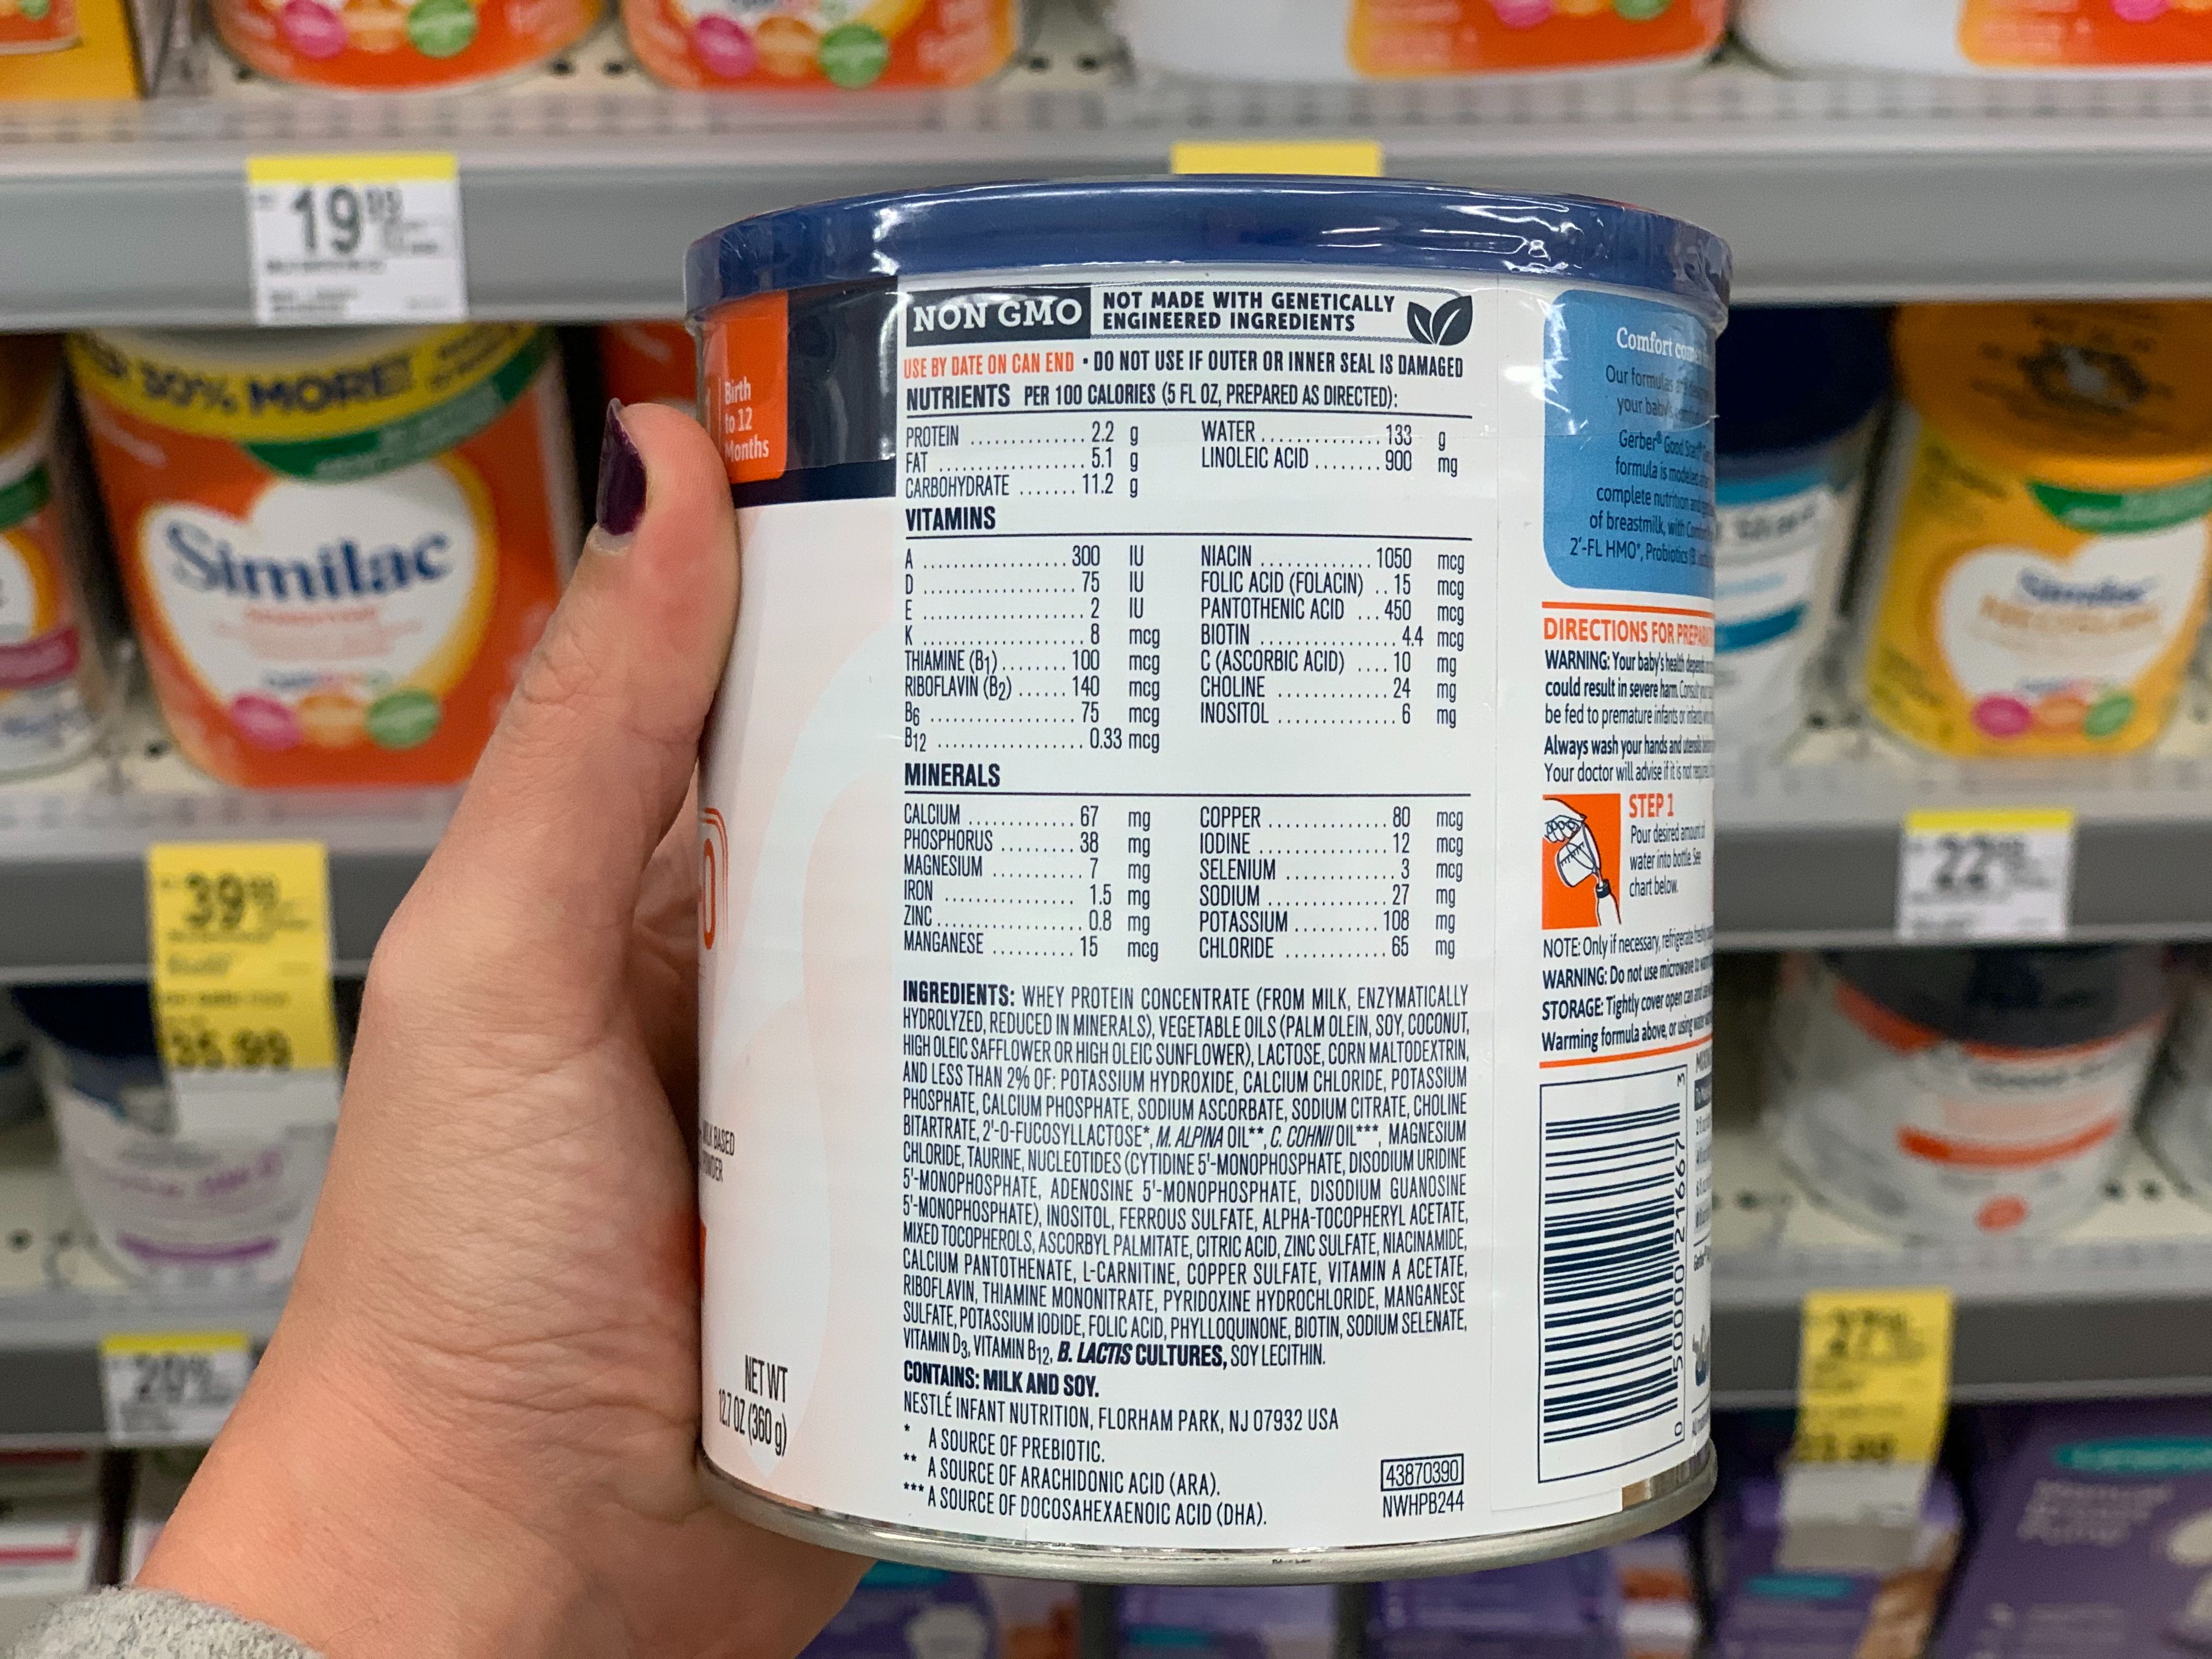 Baby formula nutritional facts 